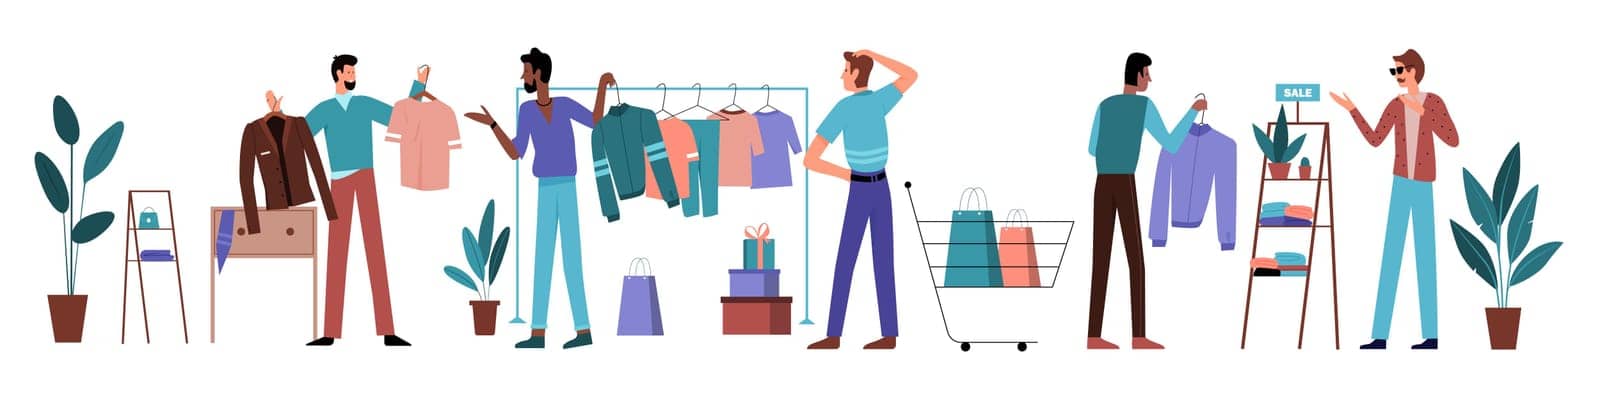 Men choose clothes on hangers during retail sales in fashion store. Funny man changing garment in wardrobe, customers shopping and buying shirts flat vector illustration. Shop, merchandise concept